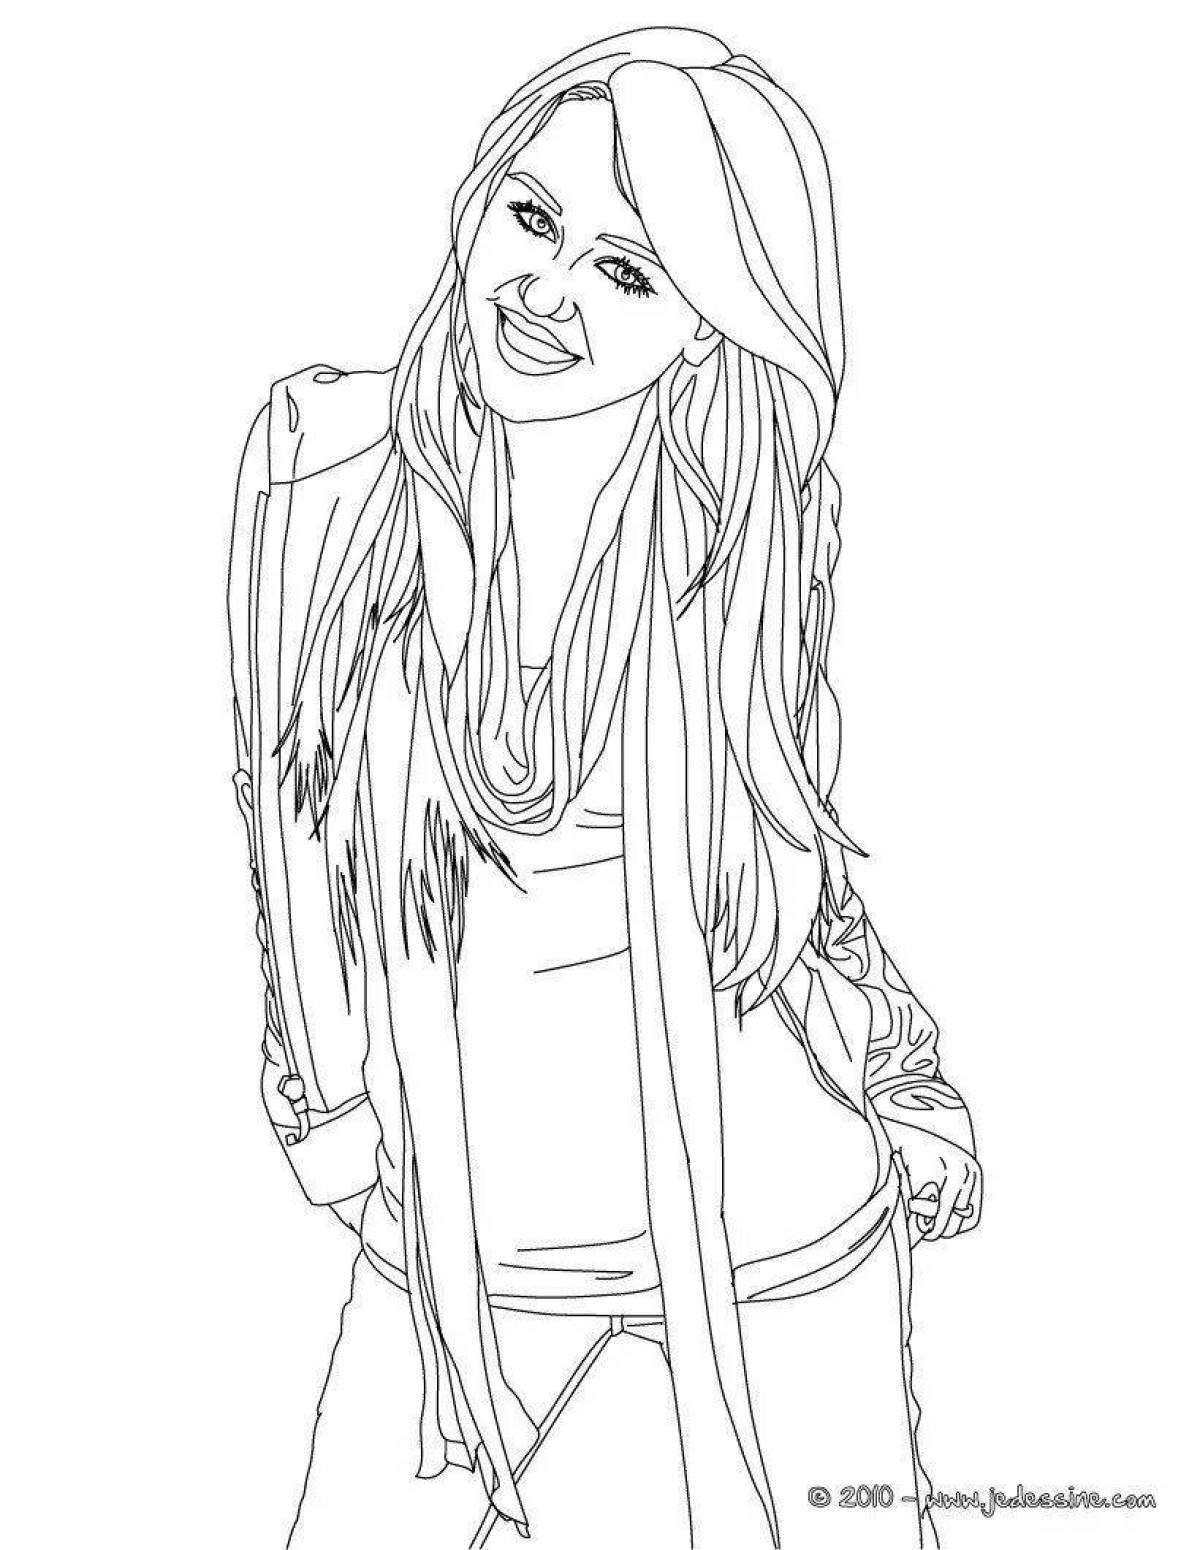 Bianca's playful coloring page